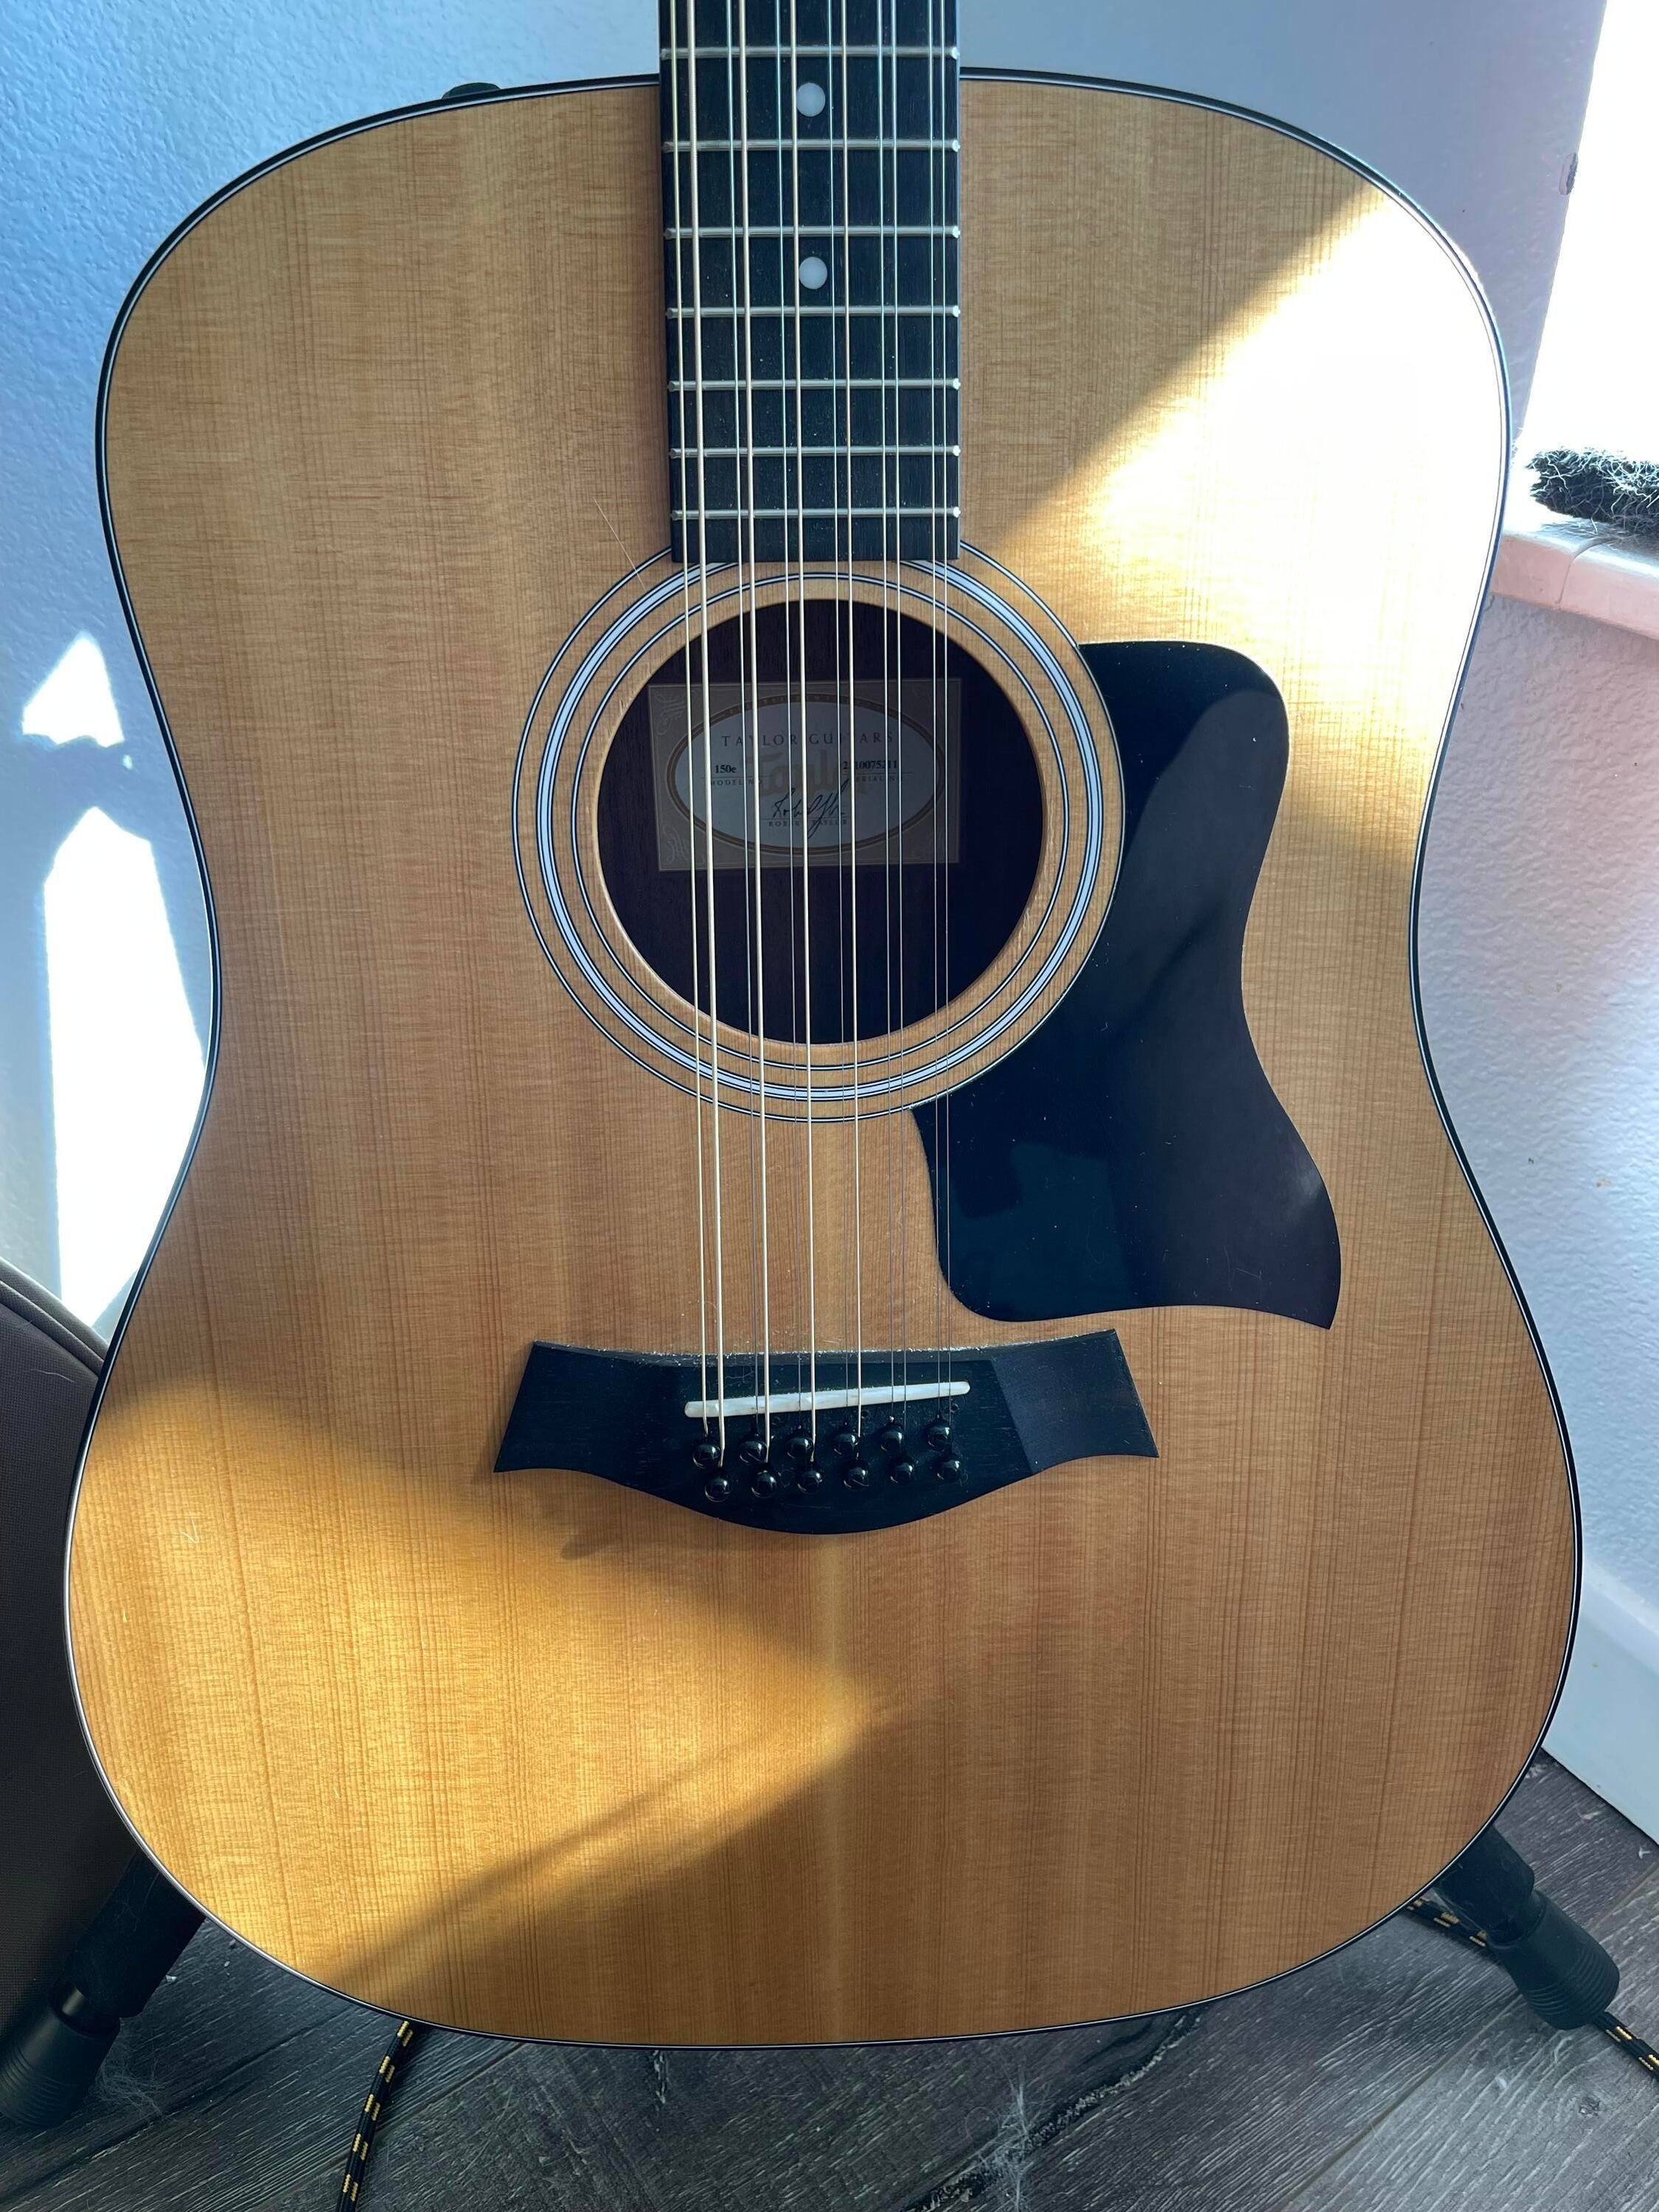 Used Taylor 150e 12 String Acoustic Electric Guitar